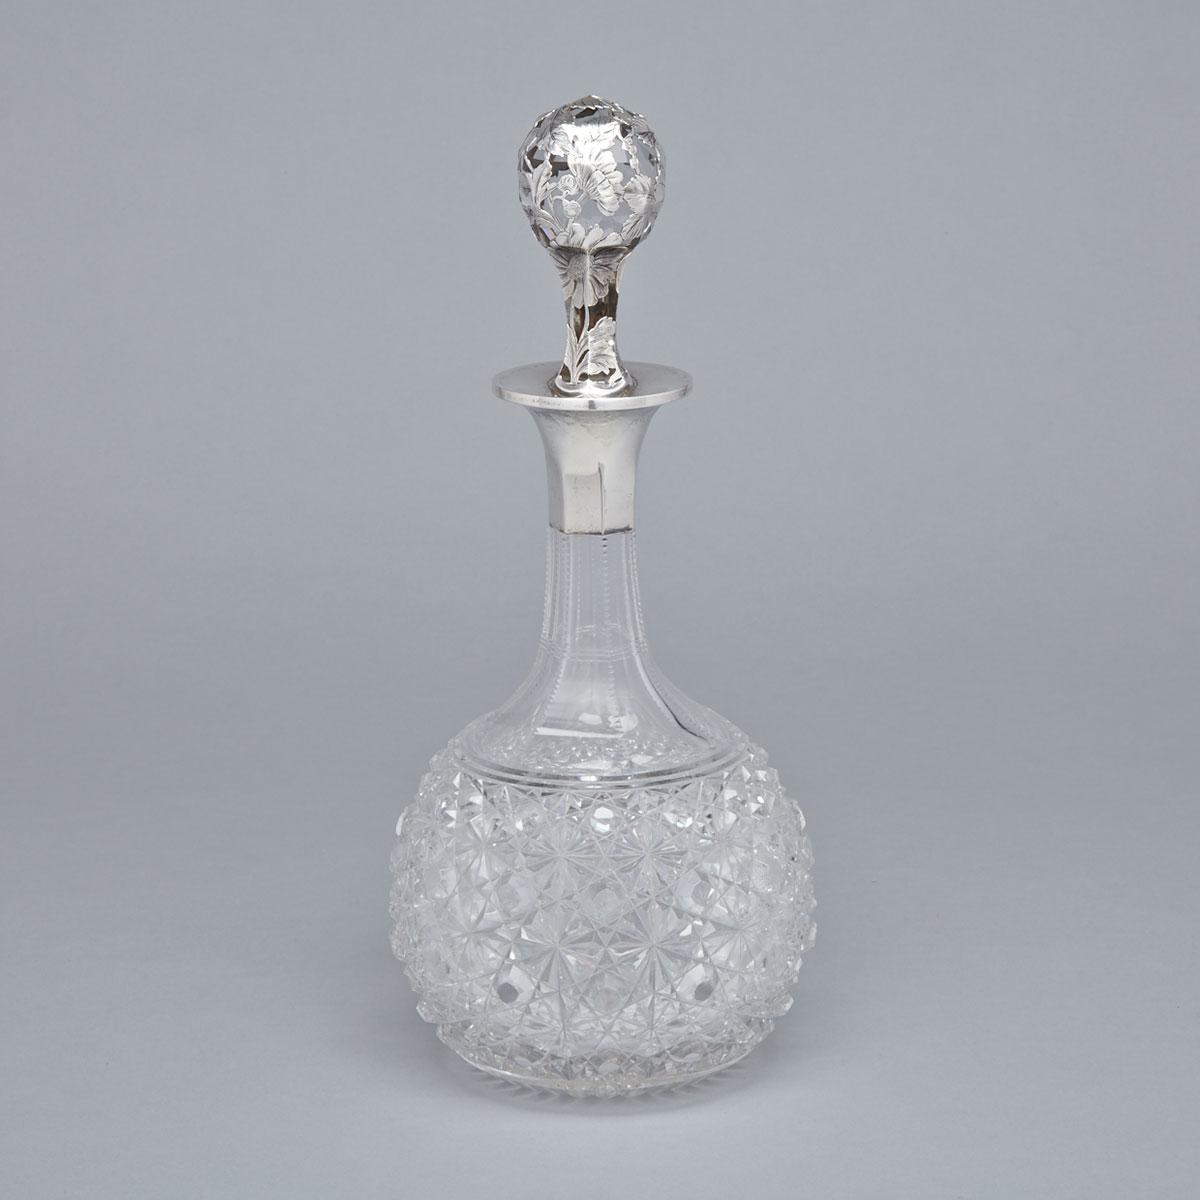 American Silver Mounted Cut Glass Decanter, Gorham Mfg. Co., Providence, R.I., 1892